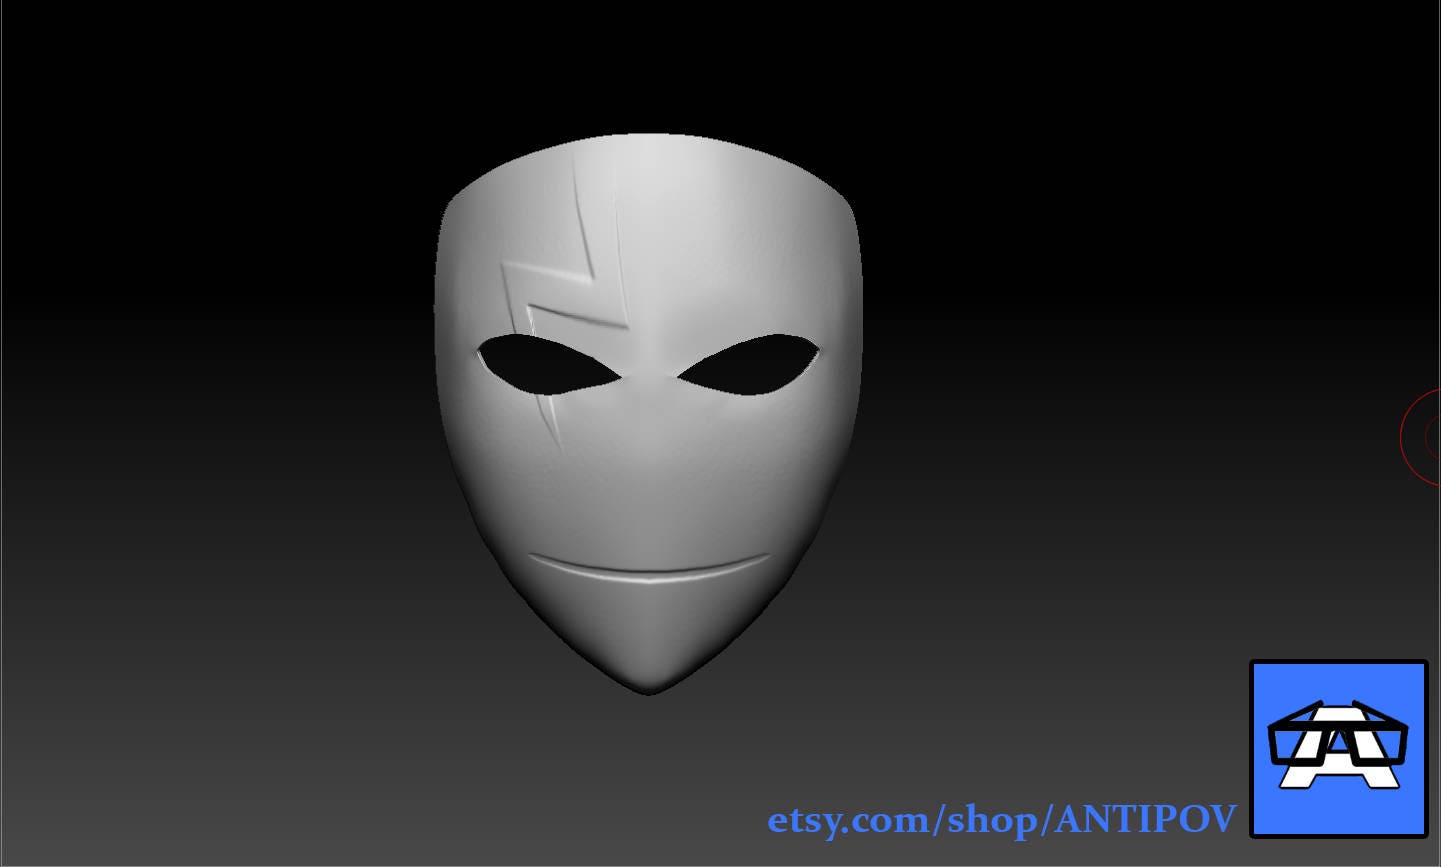 Vega Street Fighter Mask Anime Action Prop Replica Many Styles Avail Custom too!